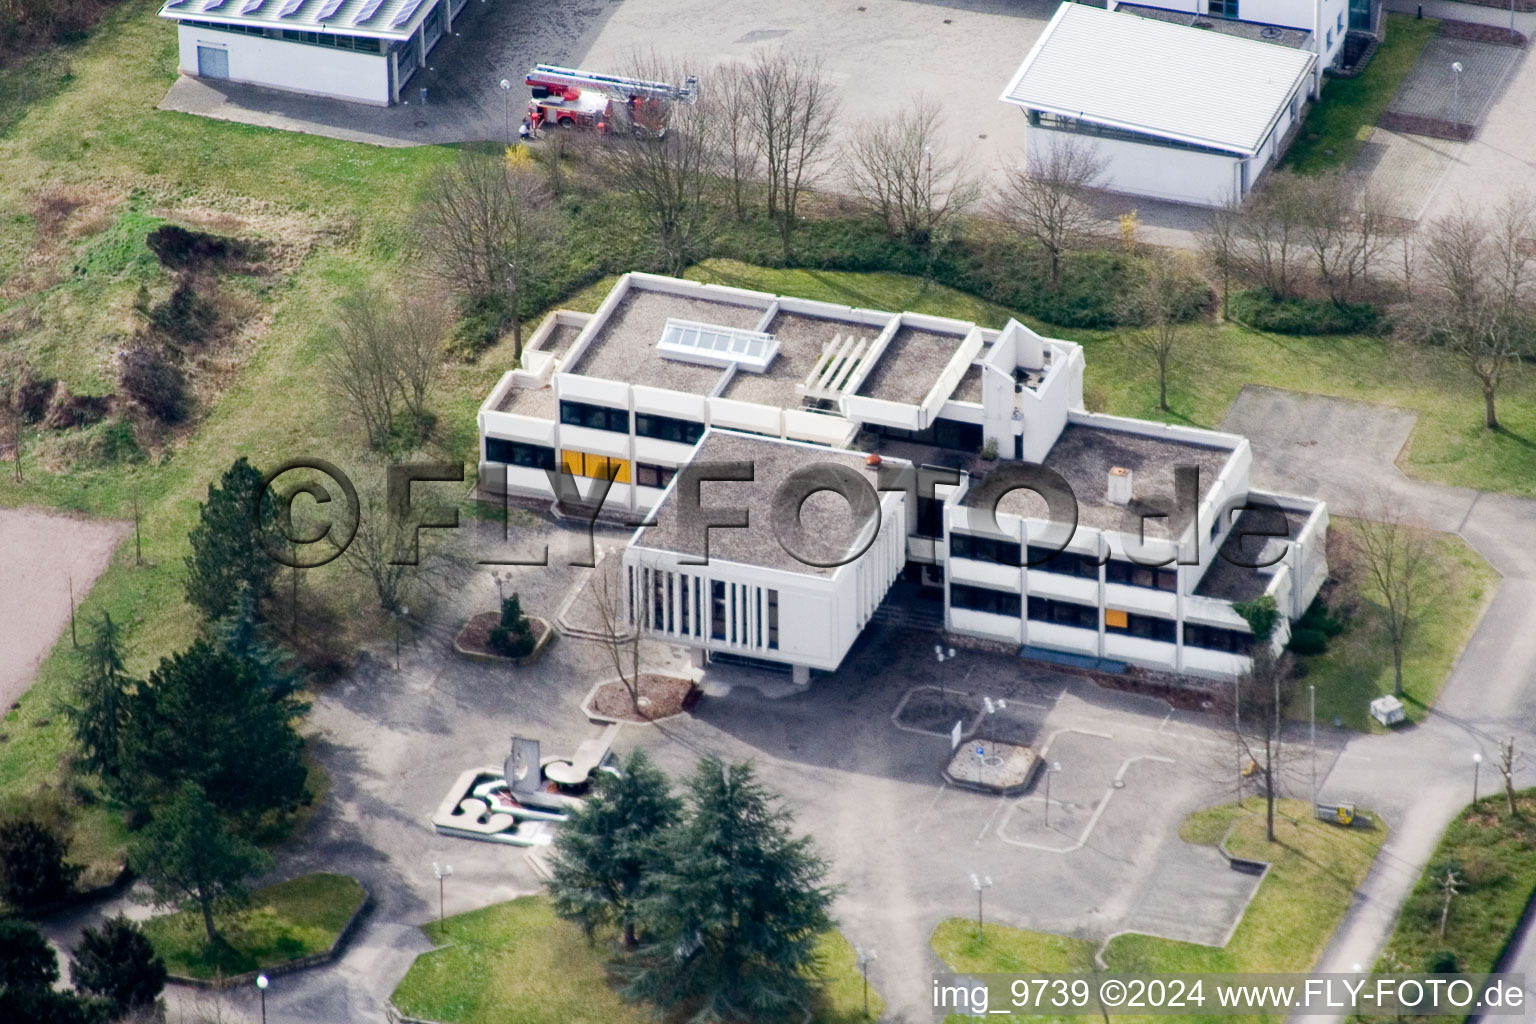 Oblique view of Association of Town Hall in Offenbach an der Queich in the state Rhineland-Palatinate, Germany